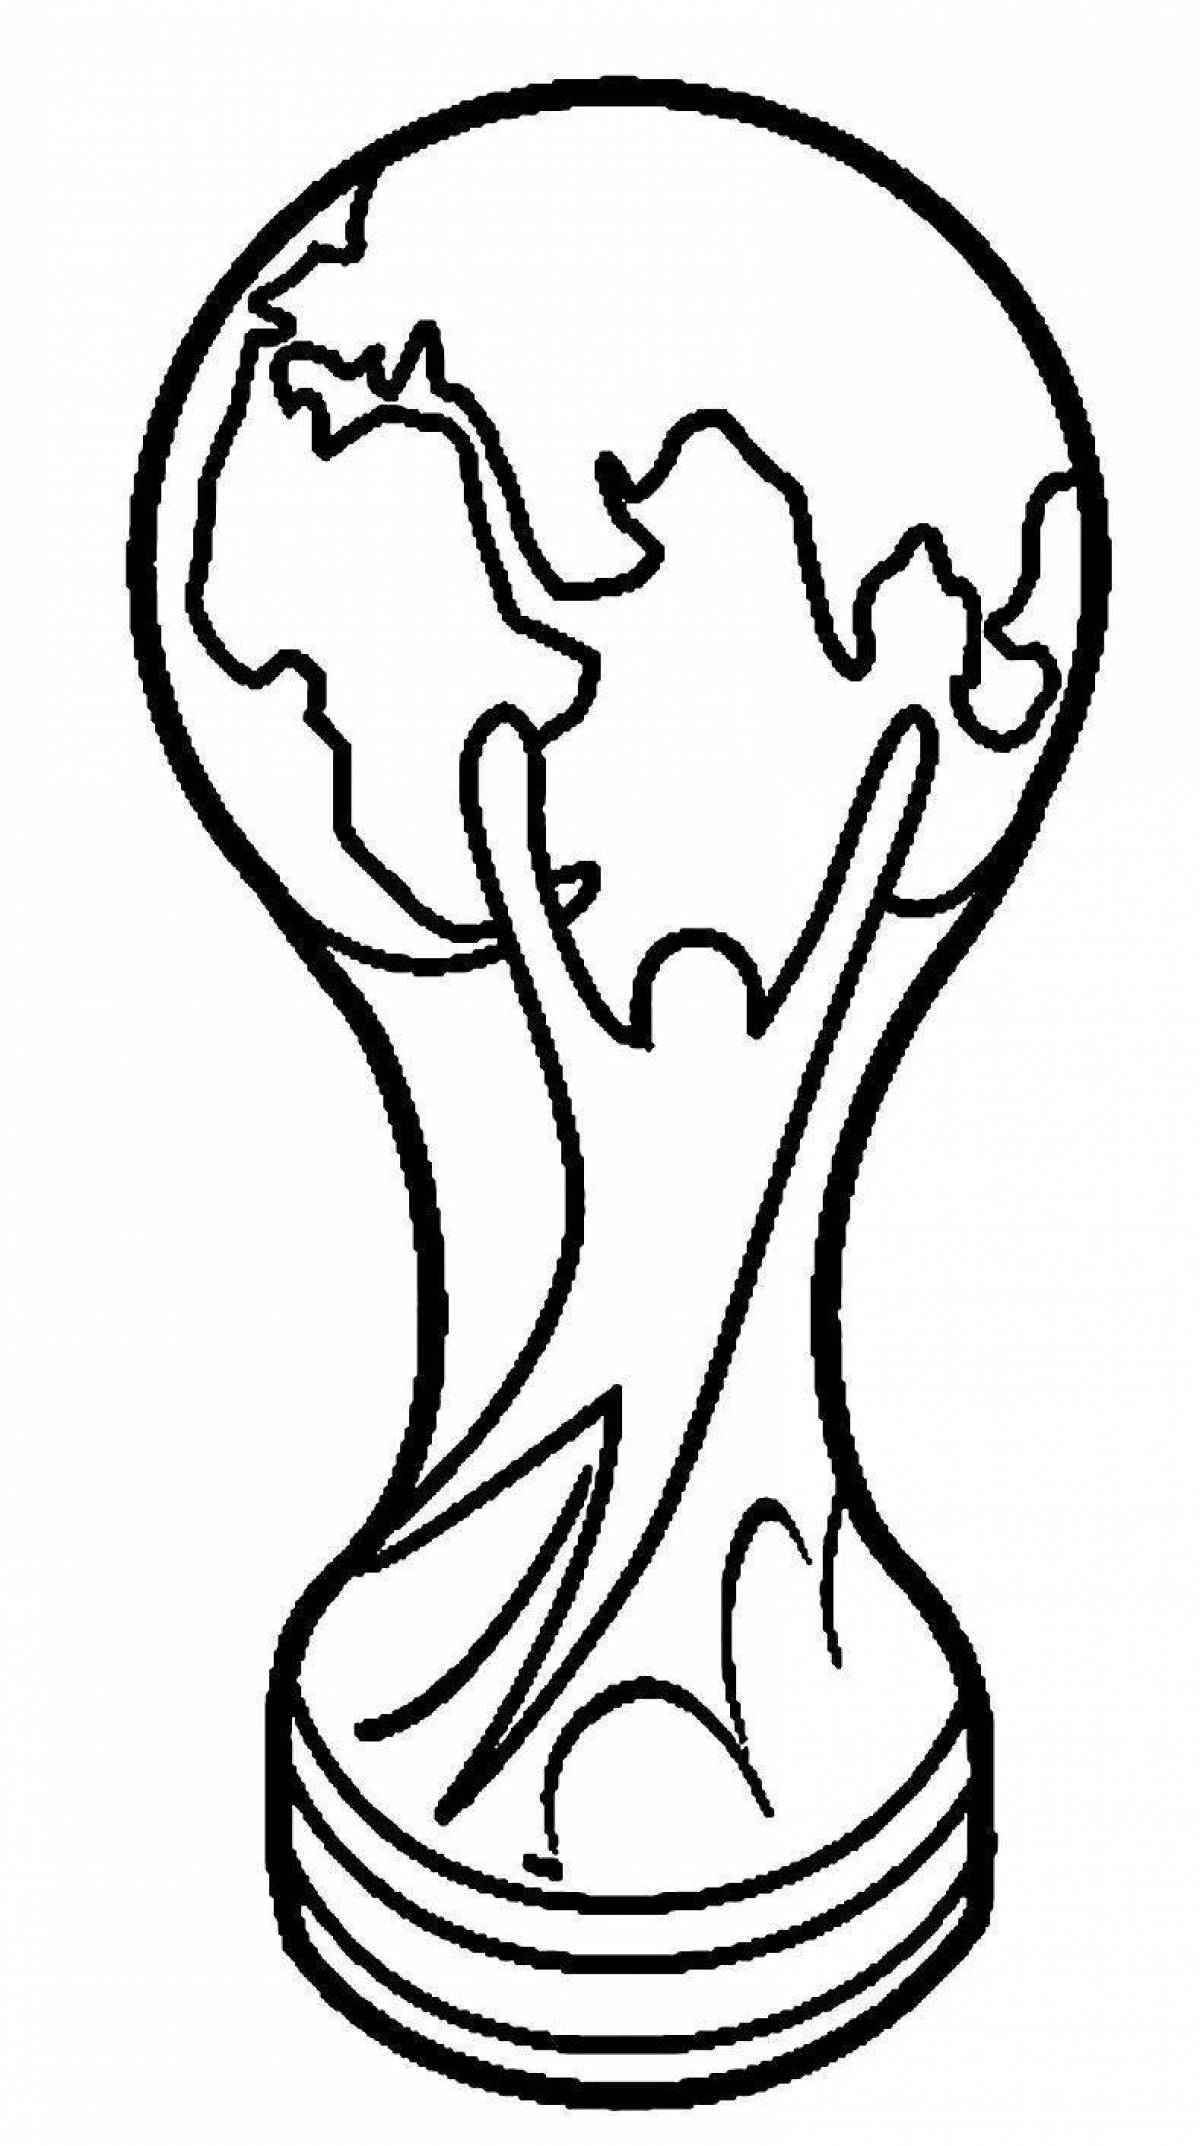 Coloring lively world cup 2022